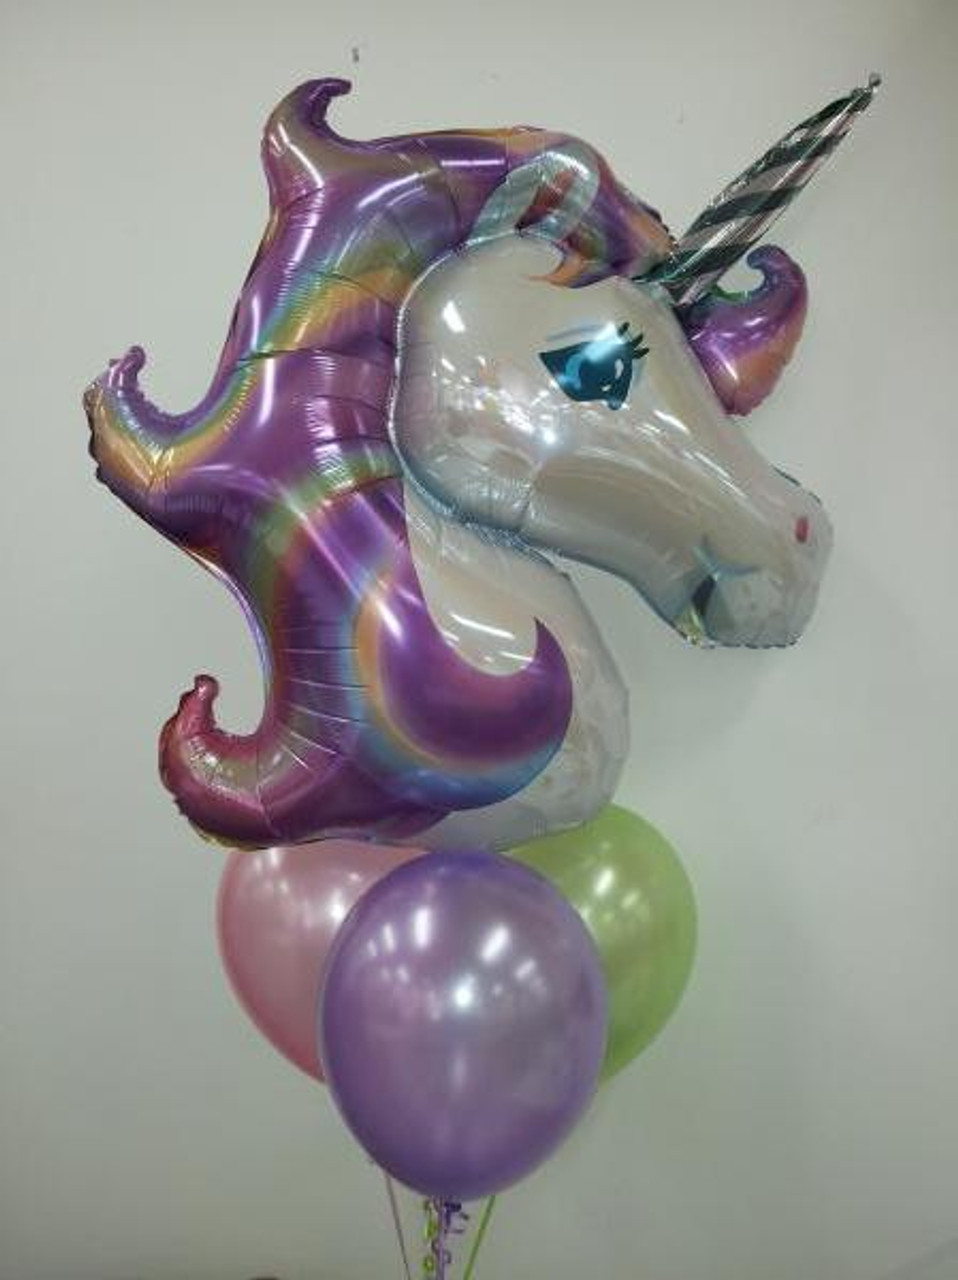 Supershape Foil with 3 plain latex on weight
Includes hifloat for longer lasting balloons